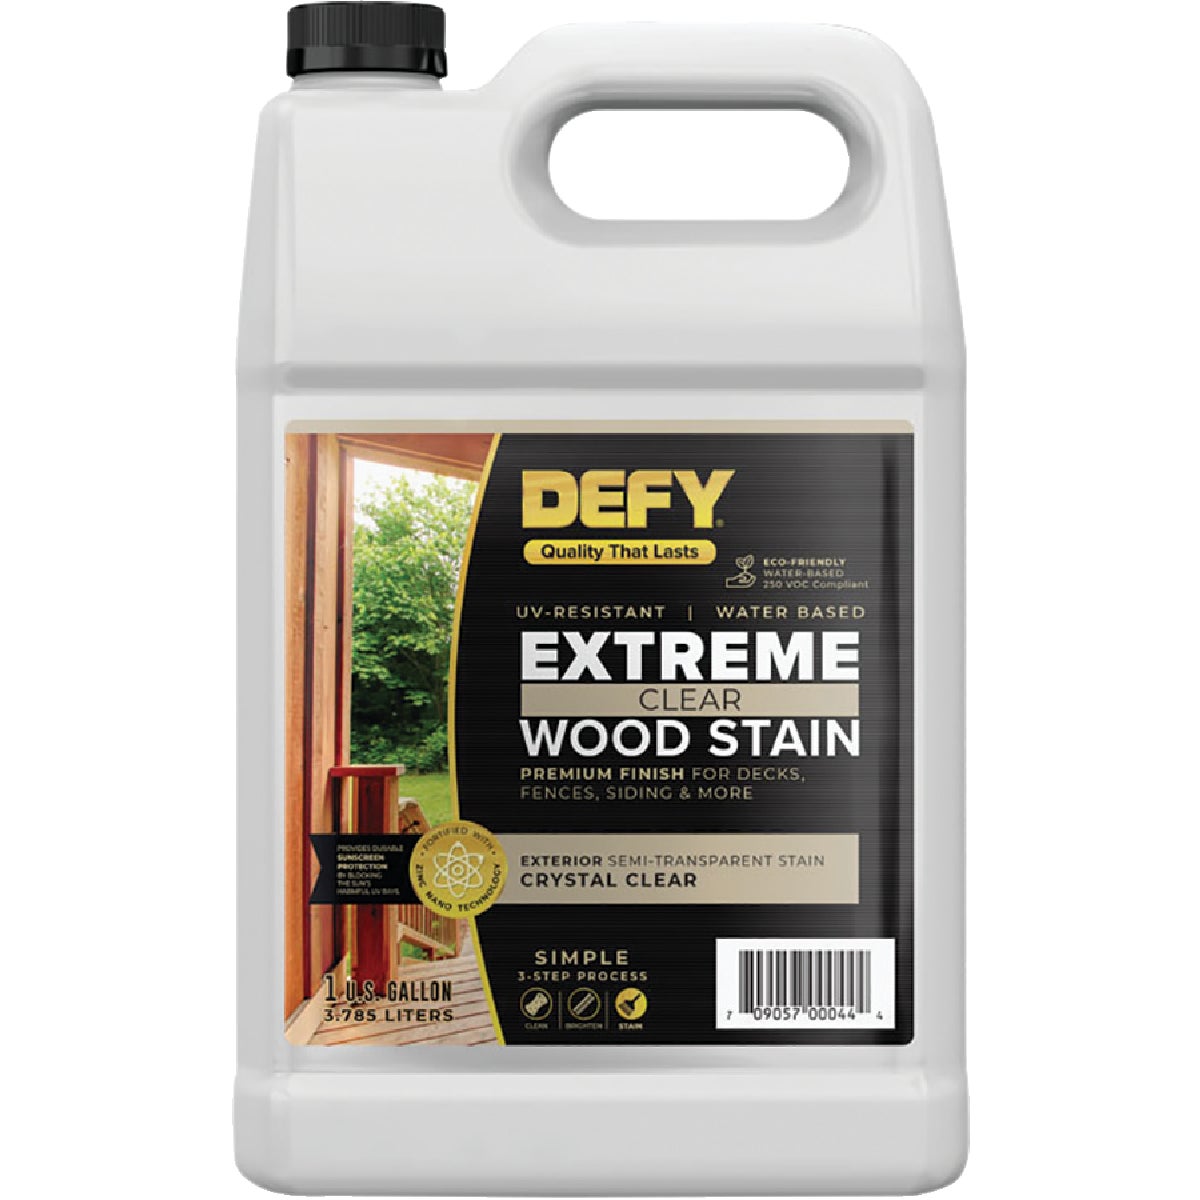 DEFY Extreme Transparent Exterior Wood Stain, Crystal Clear, 1 Gal. Bottle